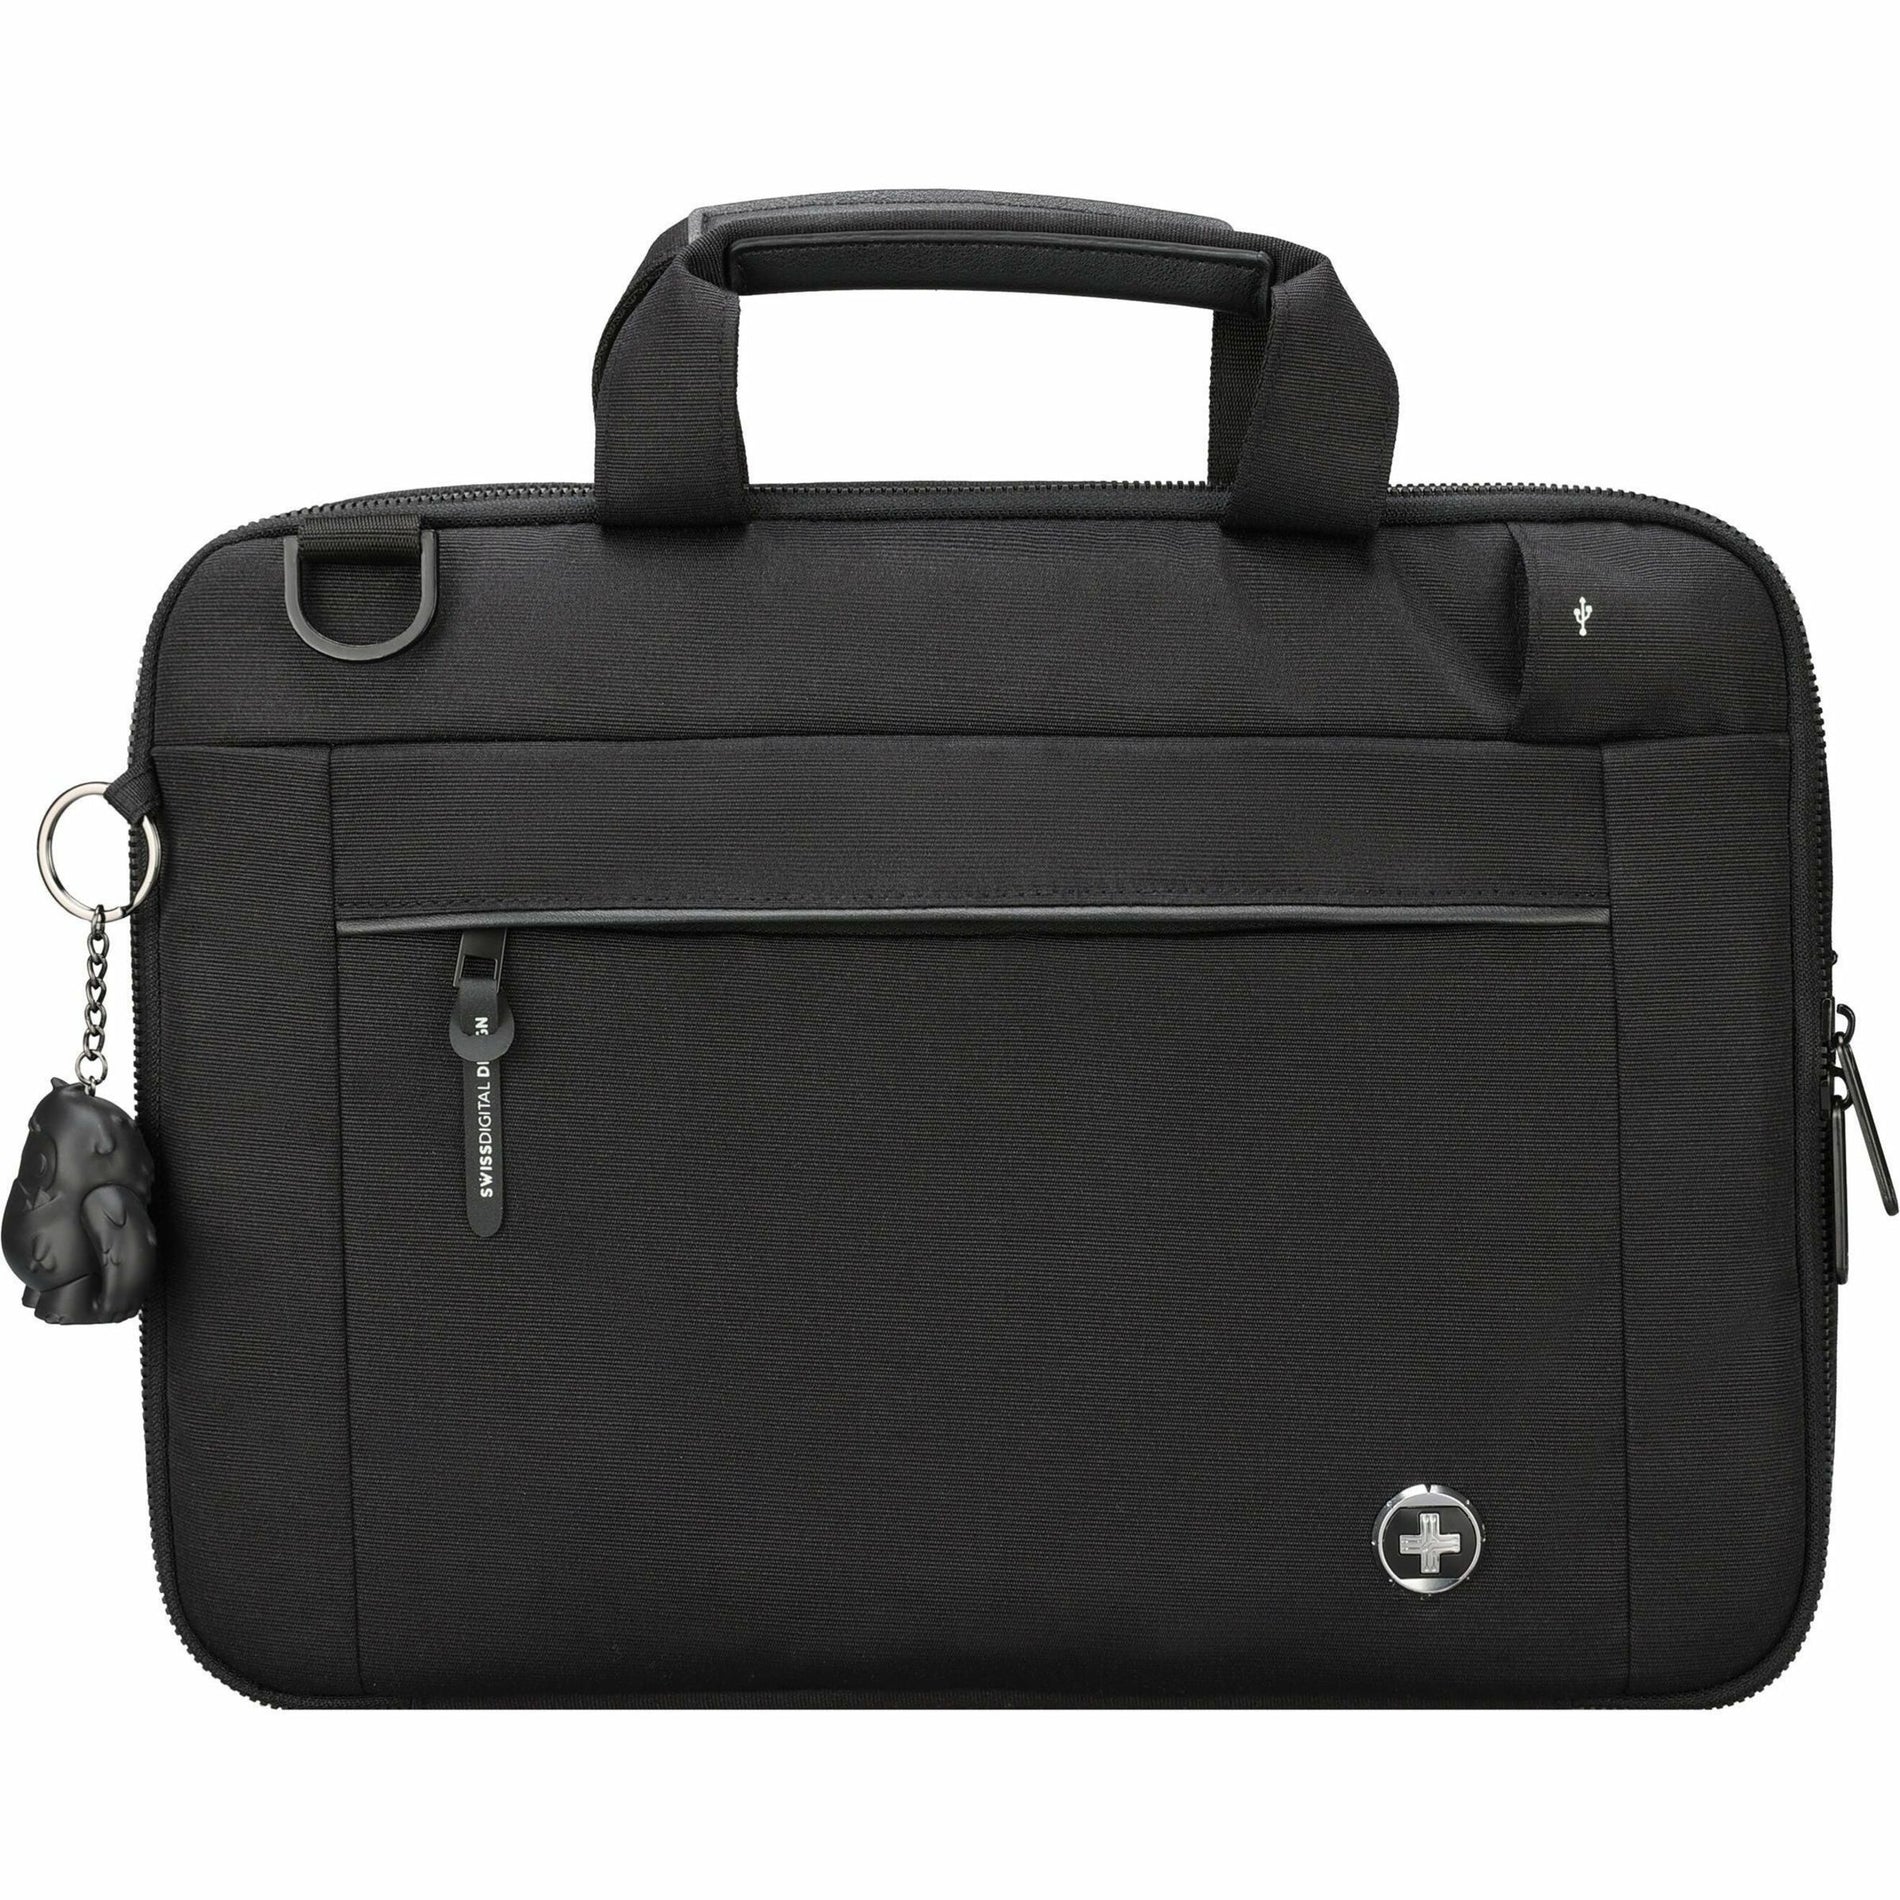 Swissdigital Design SD8525-01 Carrying Case, Sleeve for MacBook Pro, Tablet, Smartphone, and More